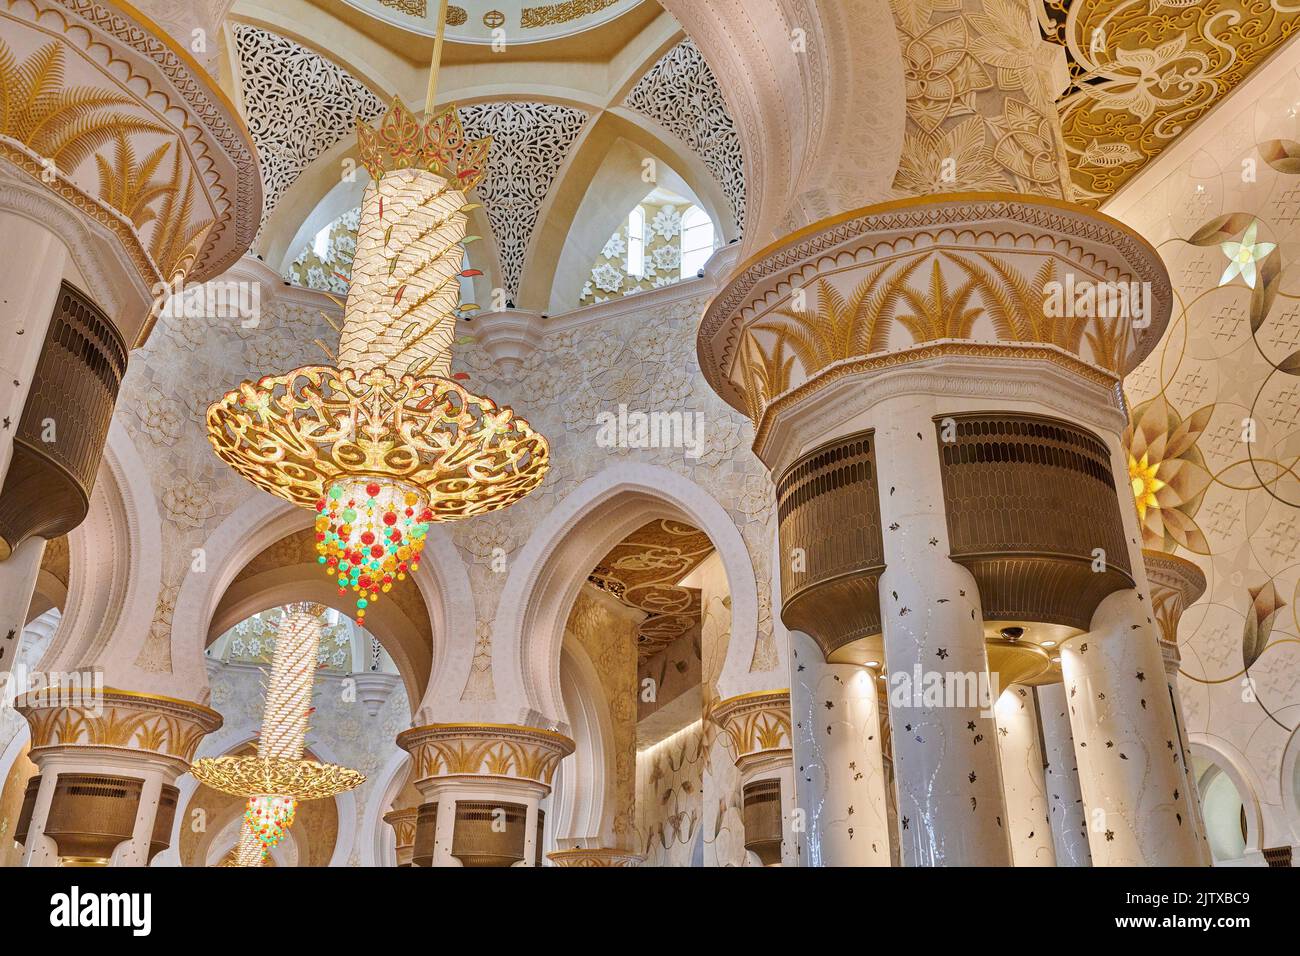 Decorated ceiling with chandeliers at Sheikh Zayed Mosque. Abu Dhabi. United Arab Emirates. Stock Photo